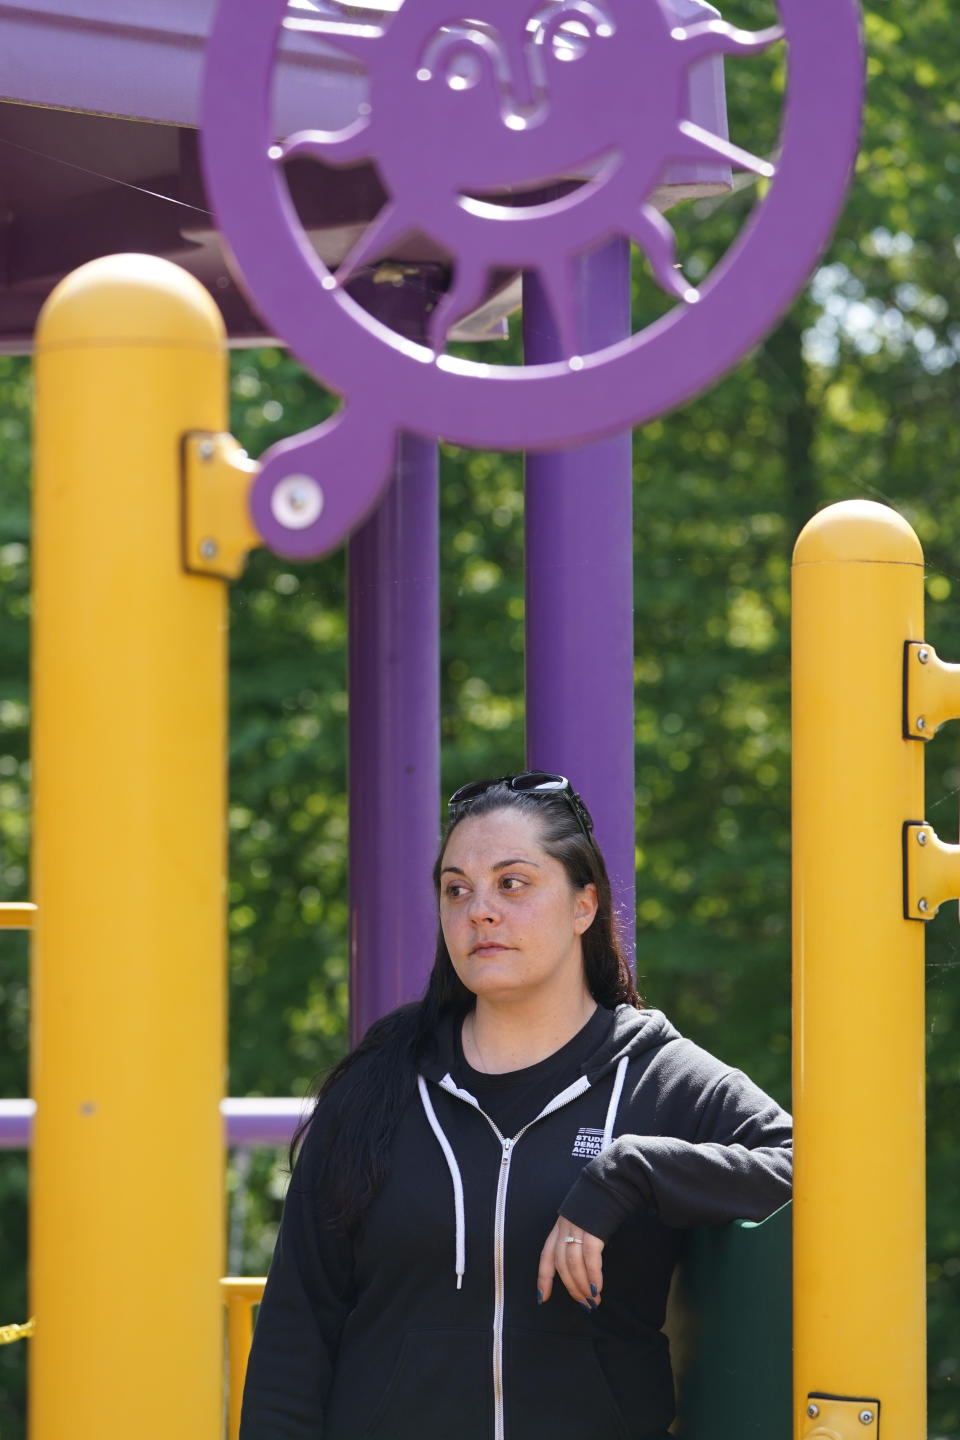 Erica Lafferty, whose mother Dawn Lafferty Hochsprung was killed during the Sandy Hook Elementary School shooting in 2012, poses for a picture on the playground honoring her mother in Watertown, Conn., Wednesday, May 25, 2022. A program manager at Everytown for Gun Safety and an advocate for universal background checks, Erica Lafferty said gains have been made quietly in states around the country. (AP Photo/Seth Wenig)